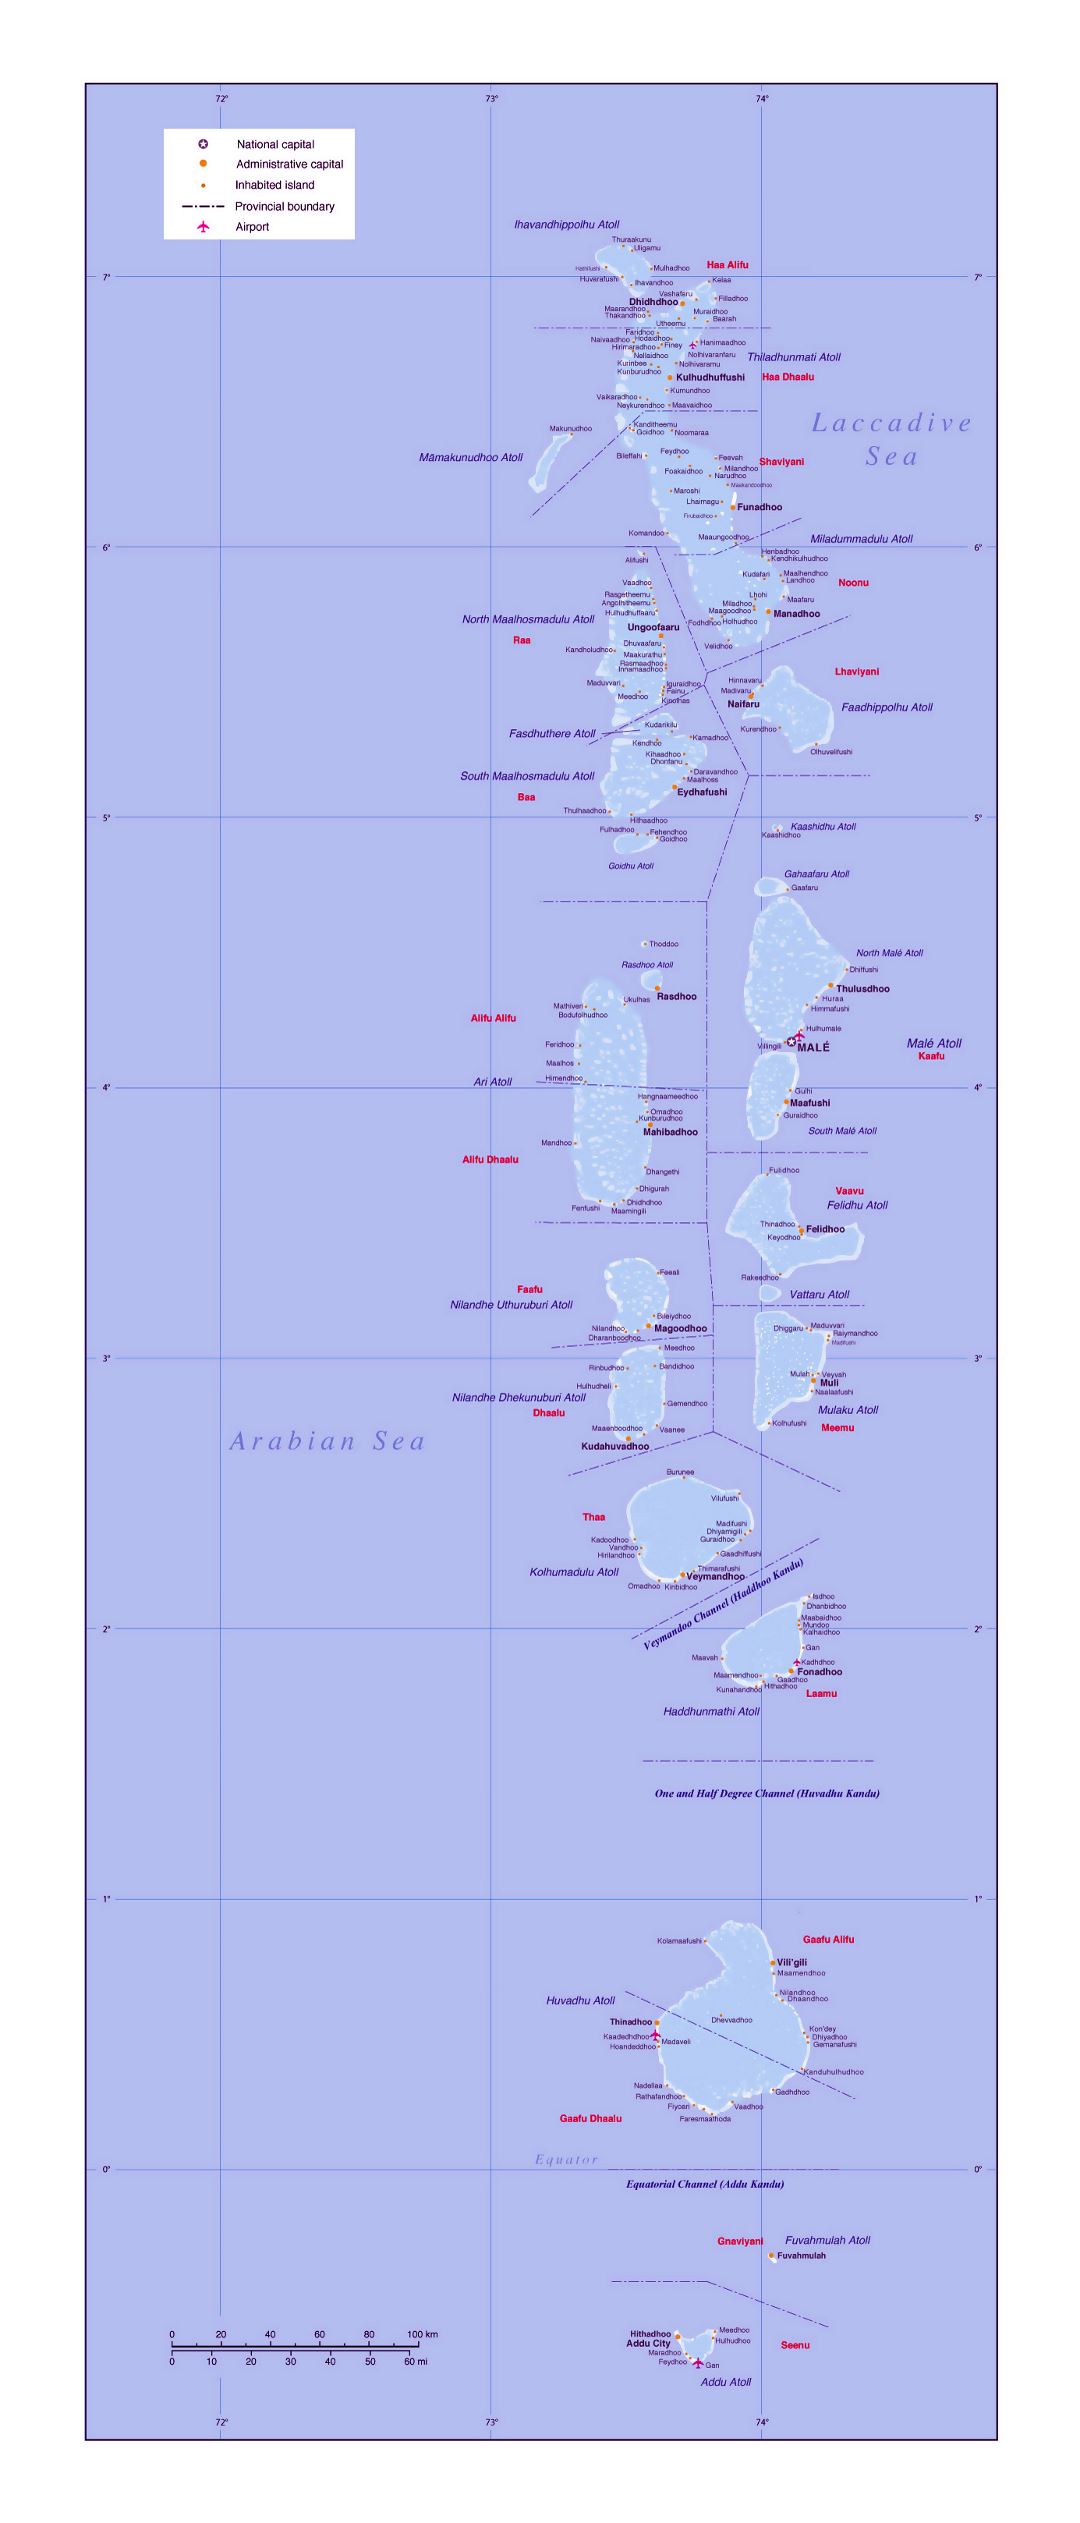 Large detailed political and administrative map of Maldives with cities and airports